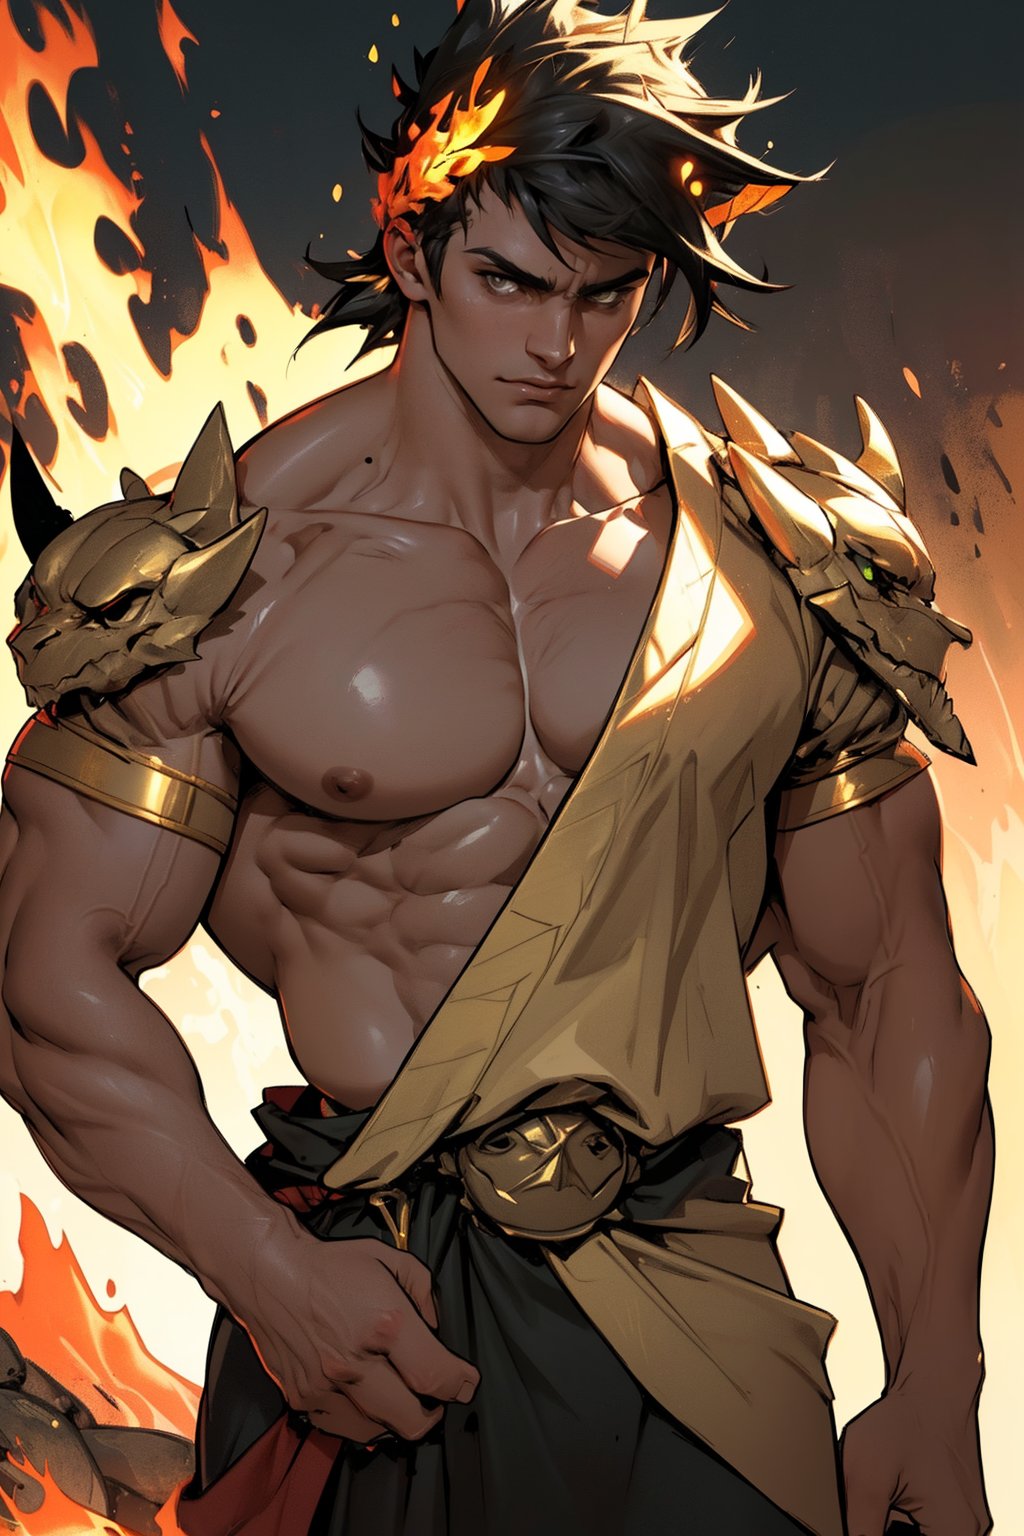 A razor-sharp close-up frames Zagreus' chiseled physique, highlighting defined muscles as he stands confidently with feet shoulder-width apart. Warm lighting accentuates chest and arm contours, casting a golden glow on rugged features. Background blurred, attention focused solely on the powerful demon's imposing presence.